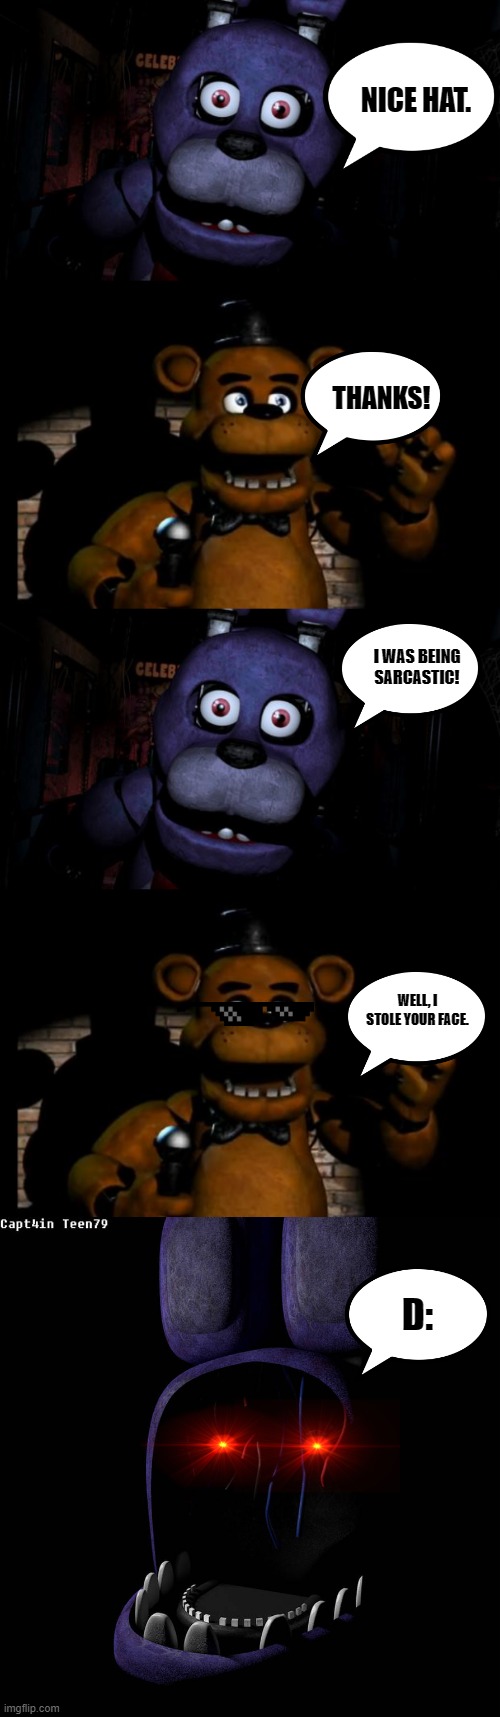 FNaF ASDF Movie MEME | NICE HAT. THANKS! I WAS BEING SARCASTIC! WELL, I STOLE YOUR FACE. D: | image tagged in fnaf bonnie,fnaf freddy,whithered bonnie | made w/ Imgflip meme maker